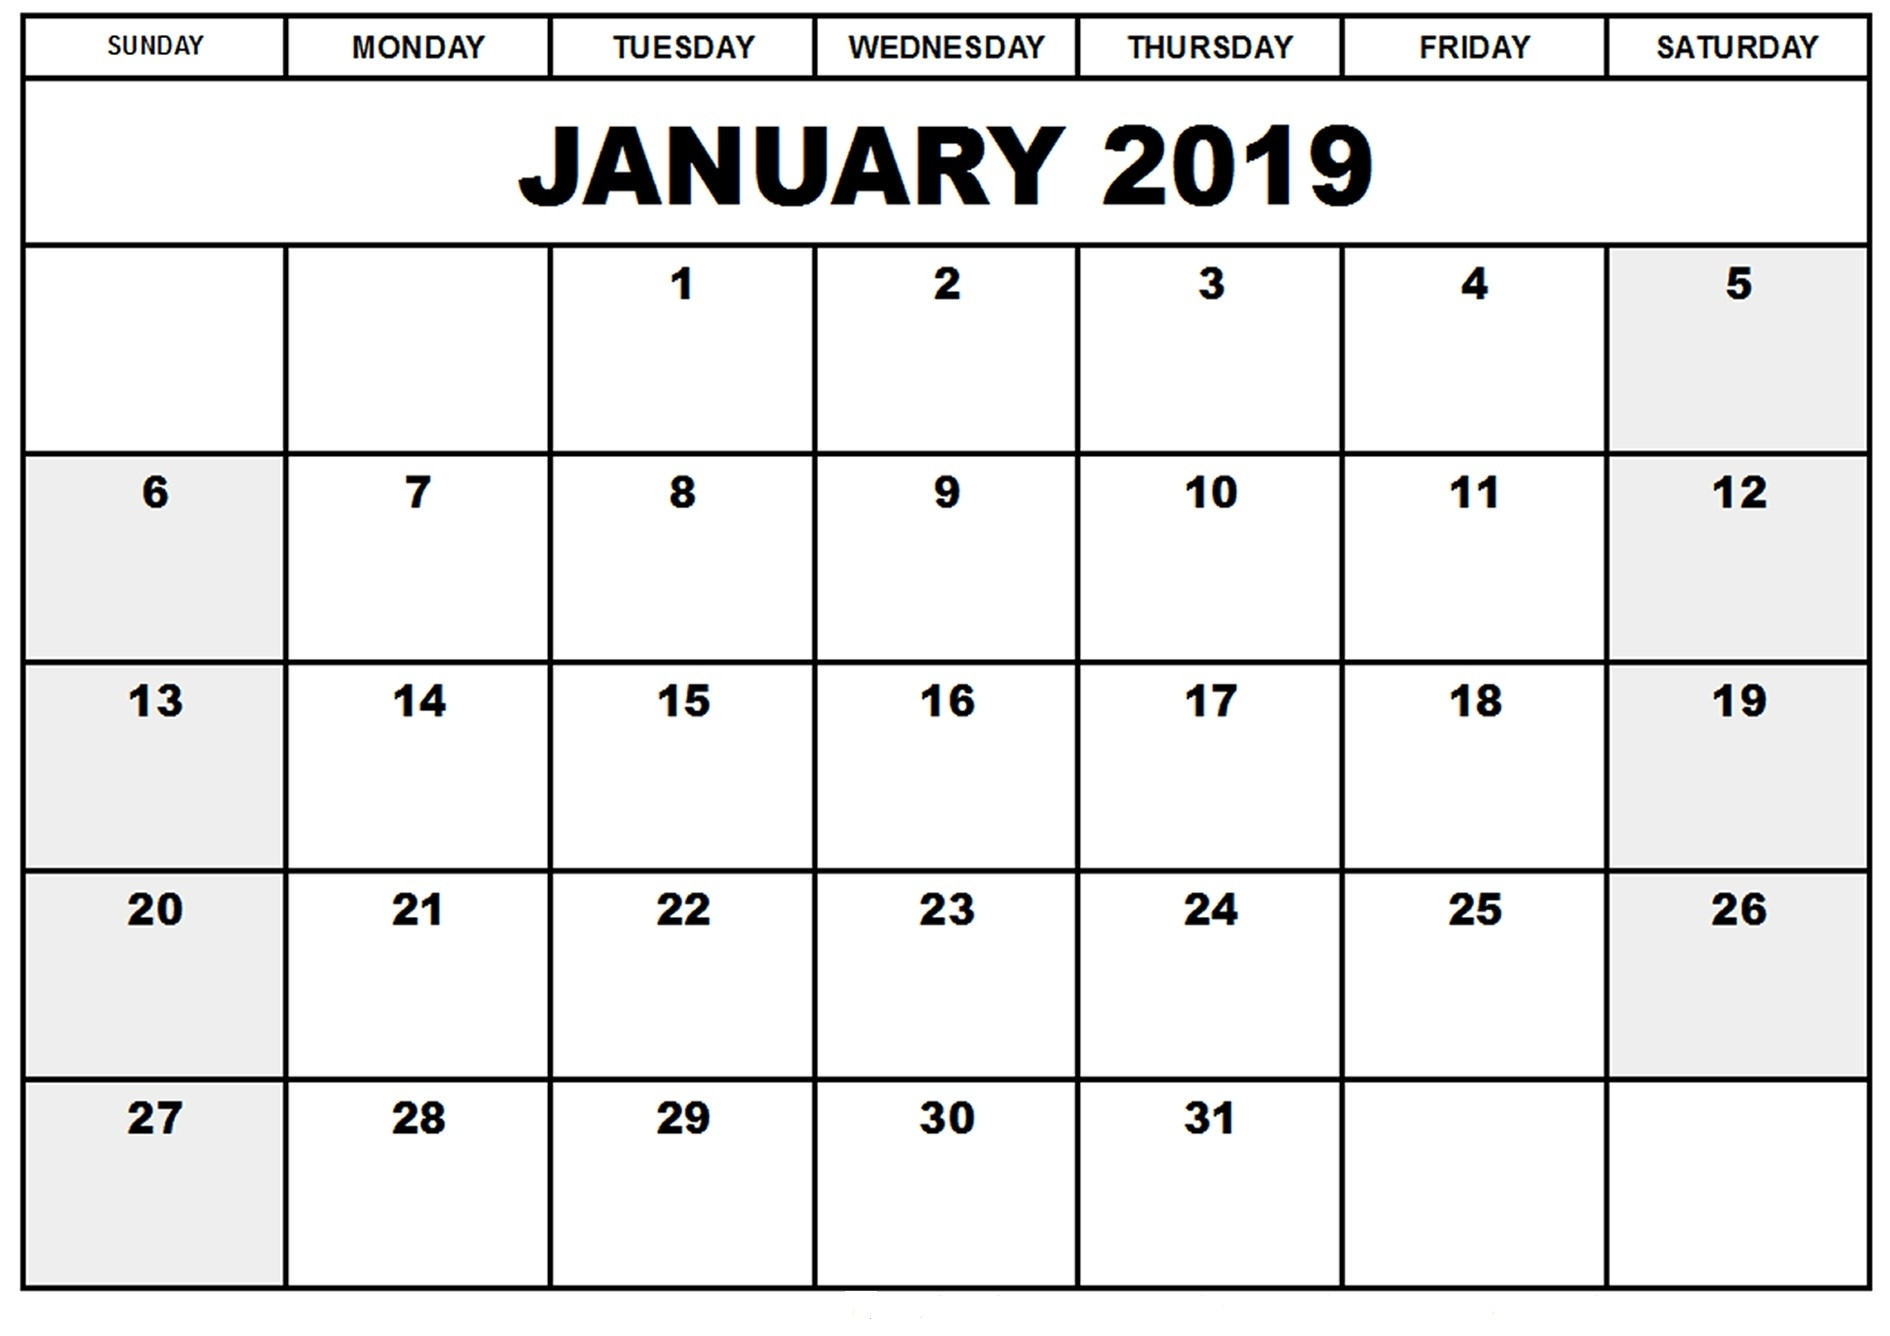 Free Printable Calendar Without Download | Ten Free  Print Free Blank Calendar Without Downloading